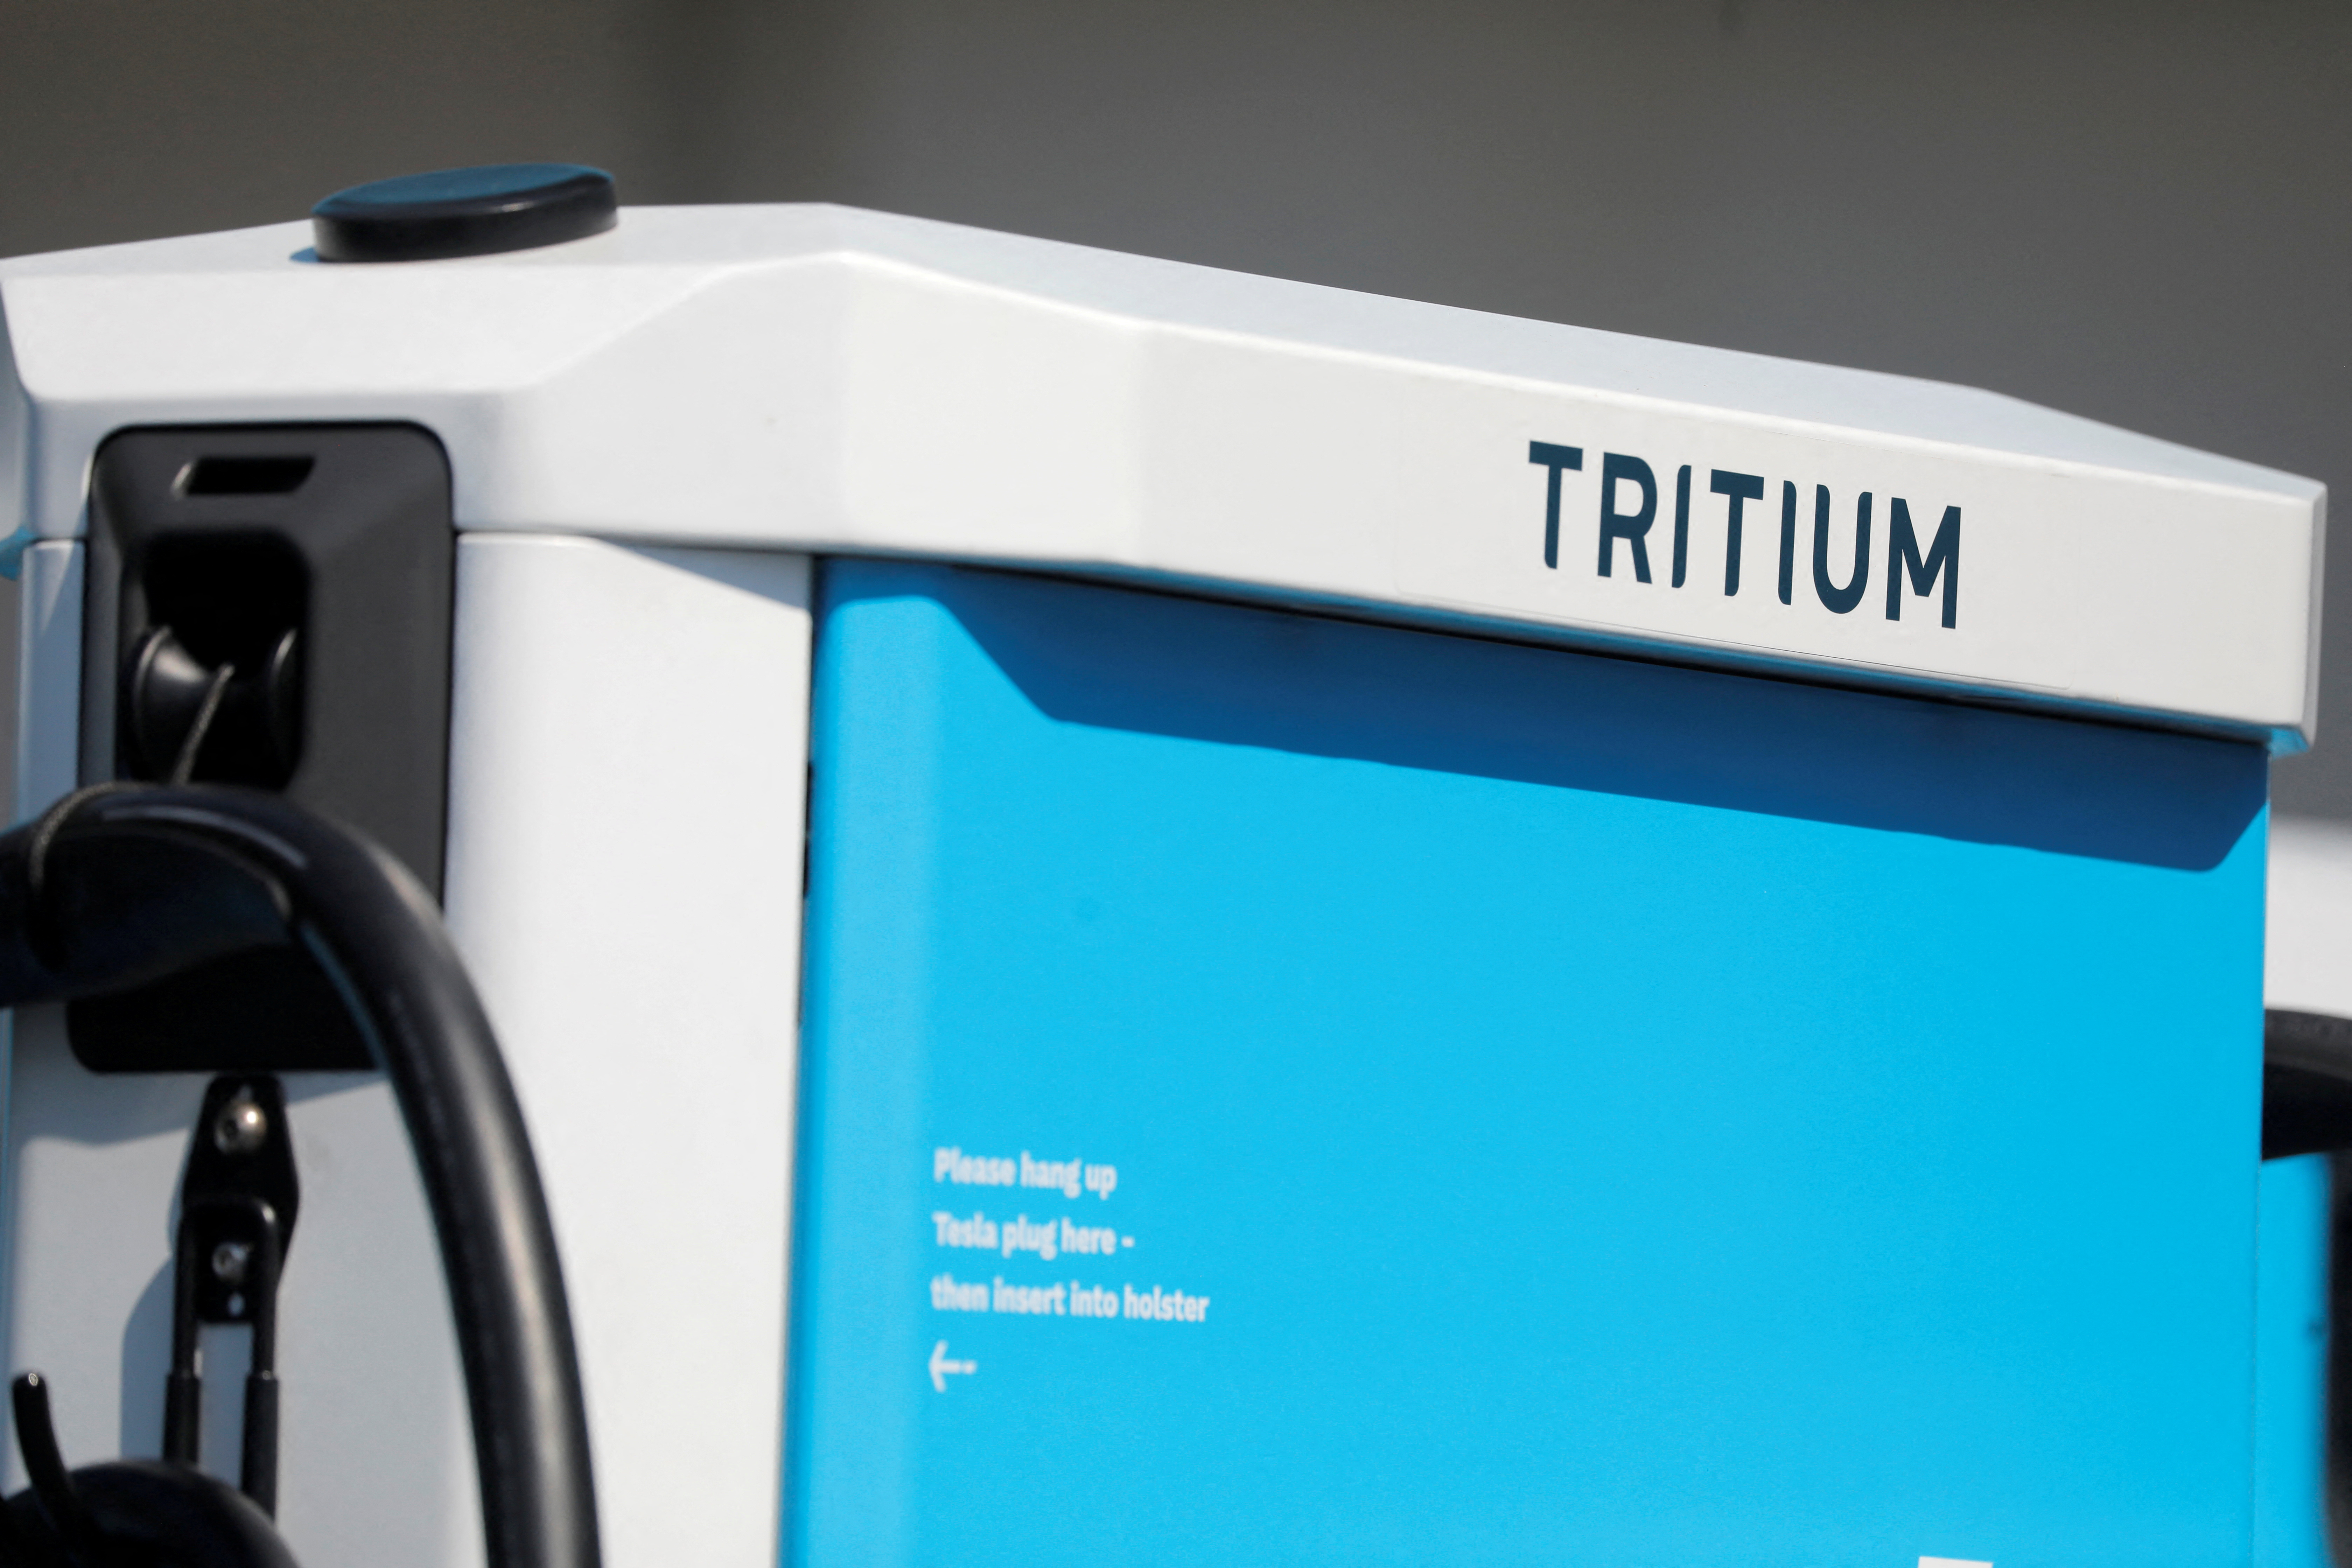 A Tritium charging station is seen at a ribbon cutting event for a Revel electric vehicle charging superhub in Brooklyn, New York City